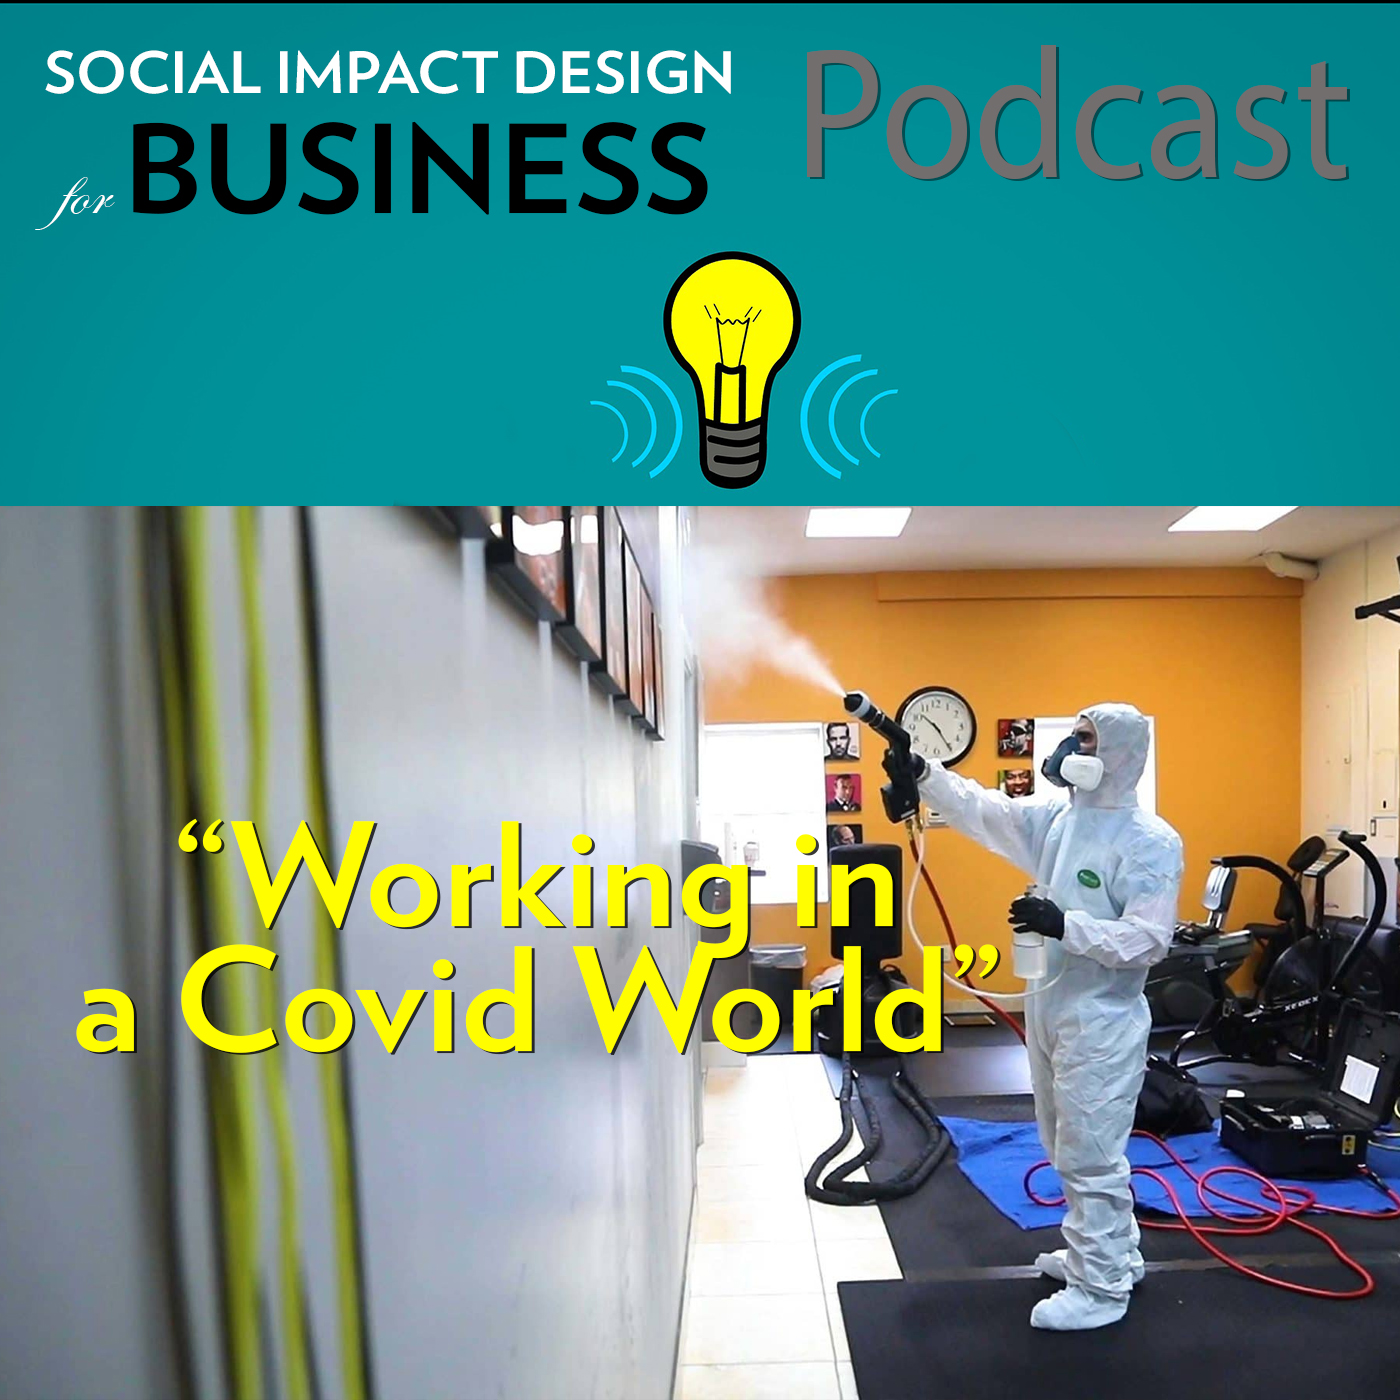 Podcast: Working in a Covid World